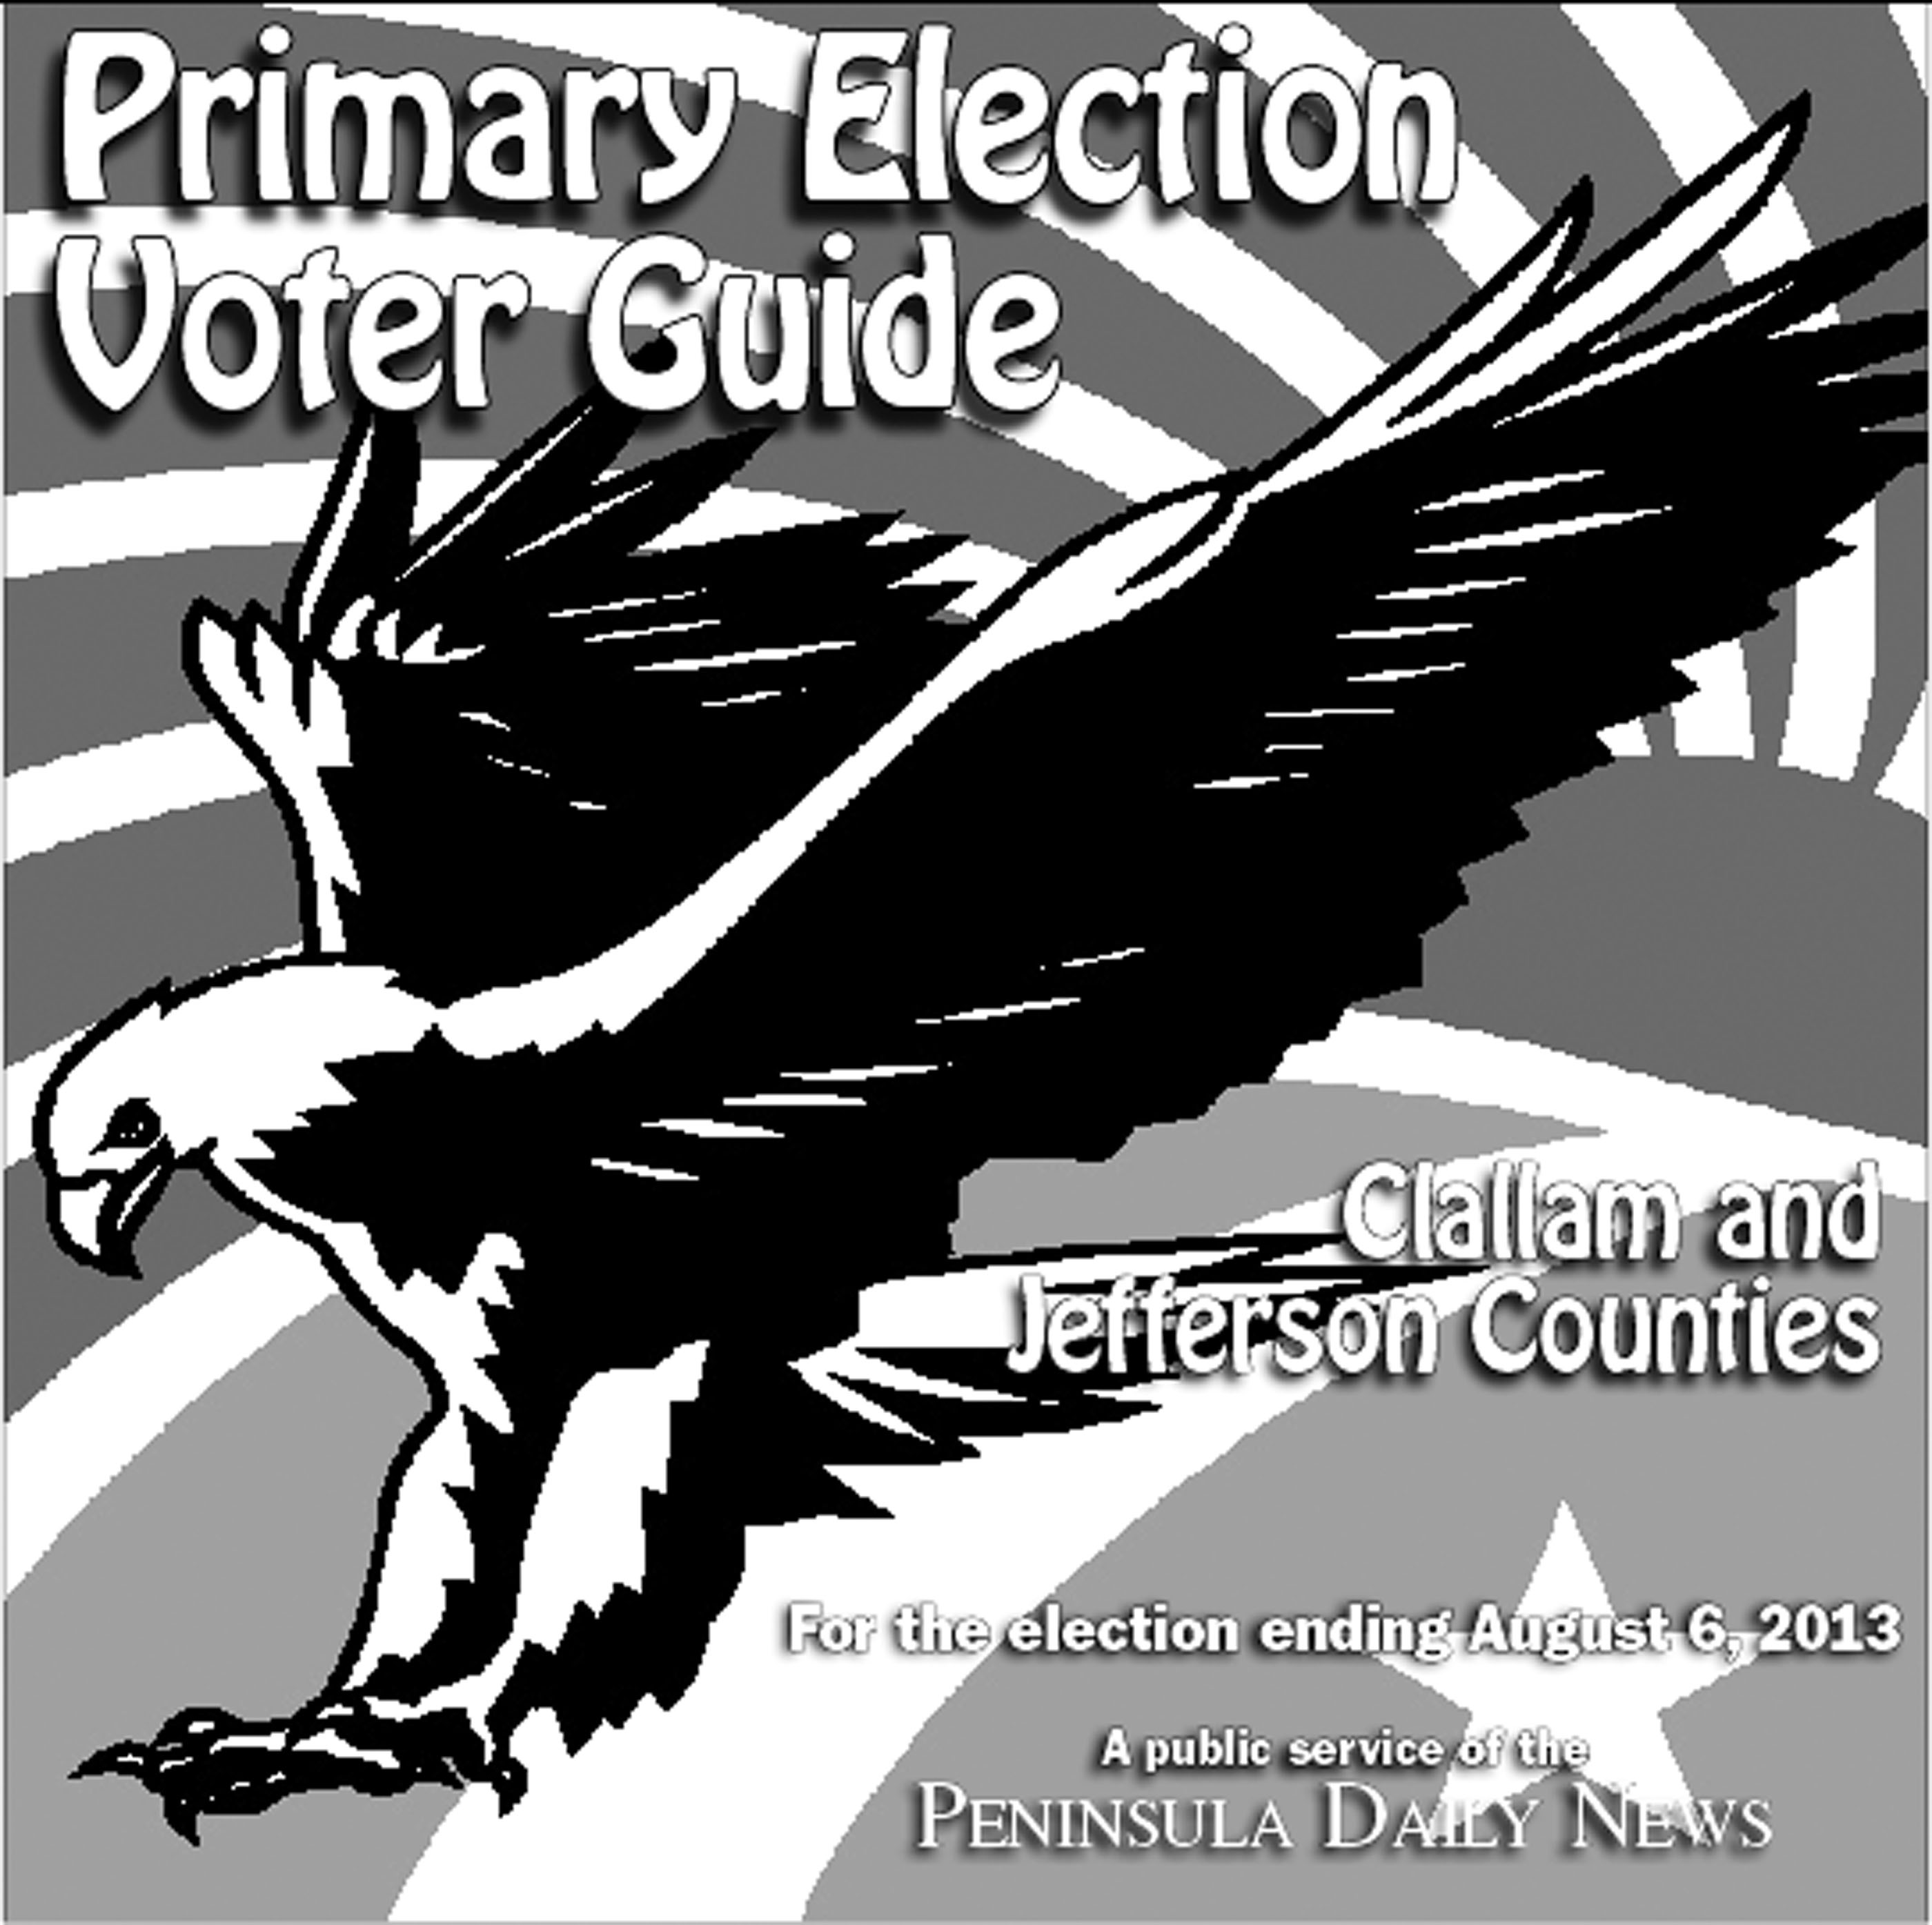 North Olympic Peninsula Primary Election Voter Guide is available